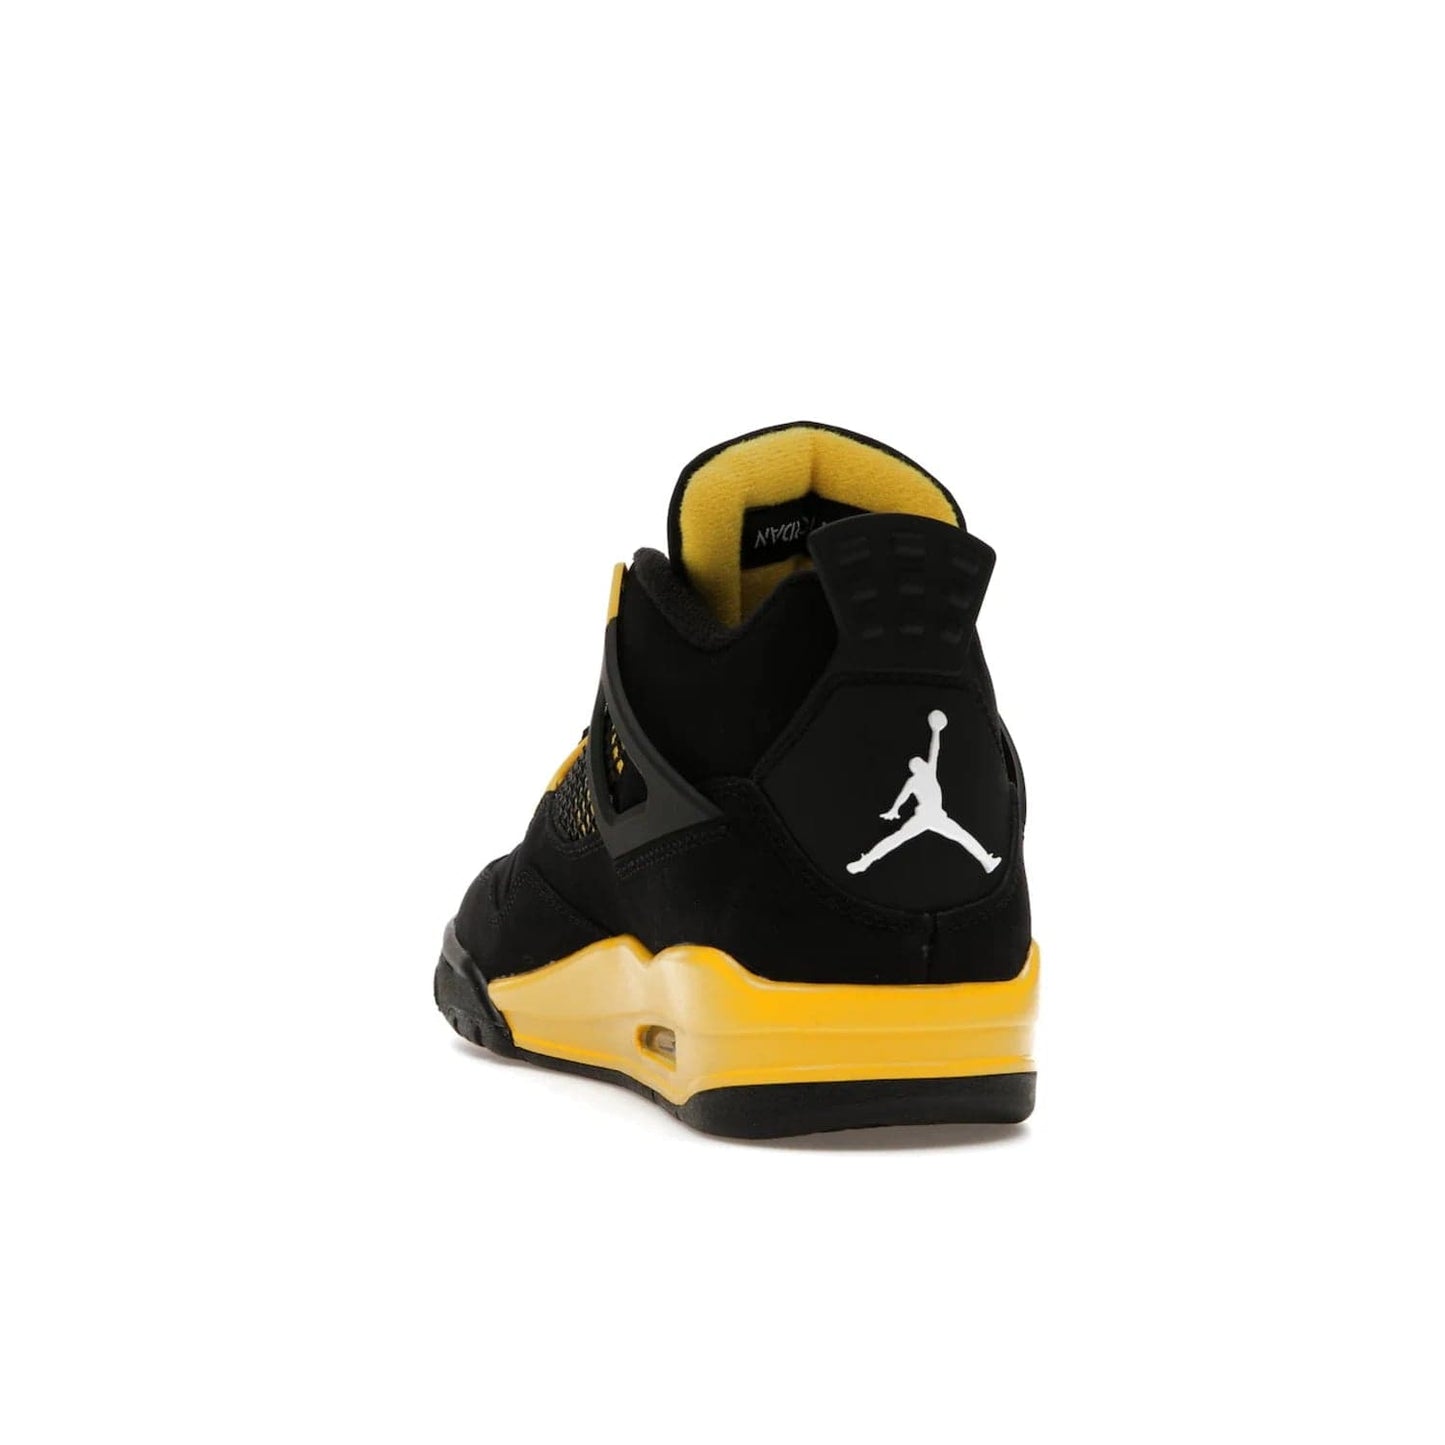 Jordan 4 Retro Thunder (2023) - Image 26 - Only at www.BallersClubKickz.com - Iconic Air Jordan 4 Retro Thunder (2023) returns with black nubuck upper and Tour Yellow details. Featuring Jumpman logo on heel tab, tongue and insoles. Dropping May 13th, 2023.